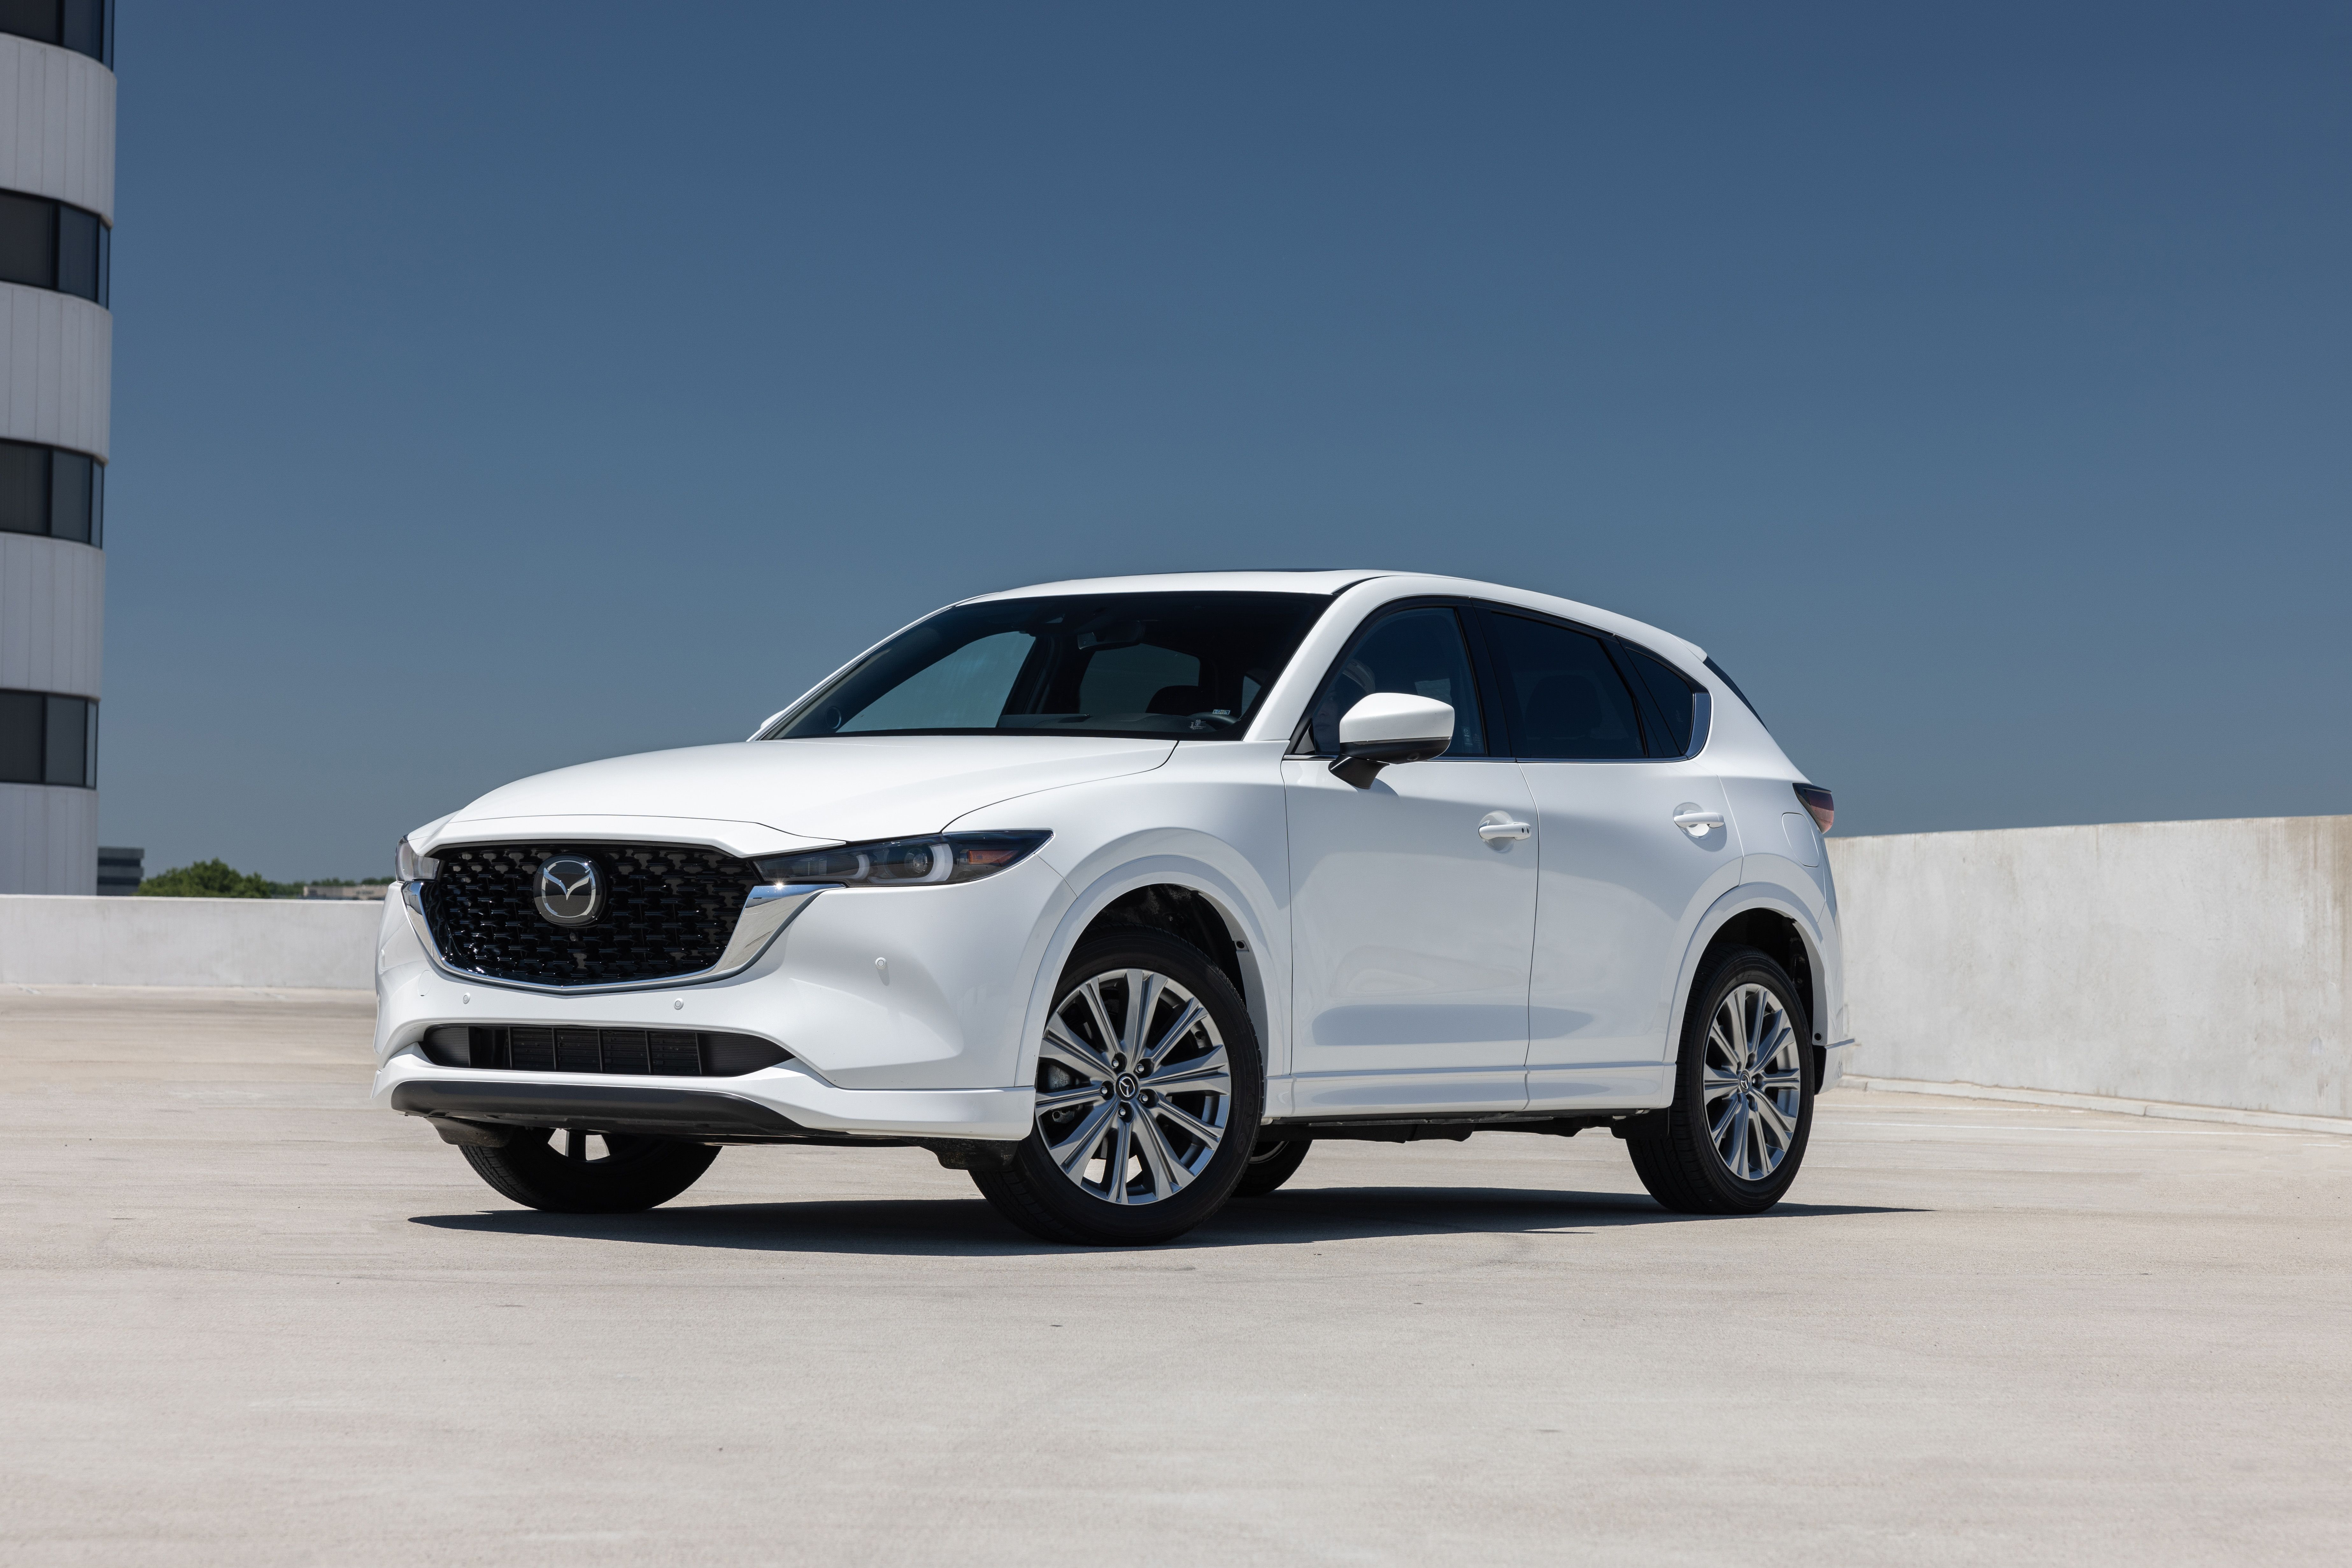 Tested: 2023 Mazda CX-50 2.5 Turbo Builds on the CX-5's Base